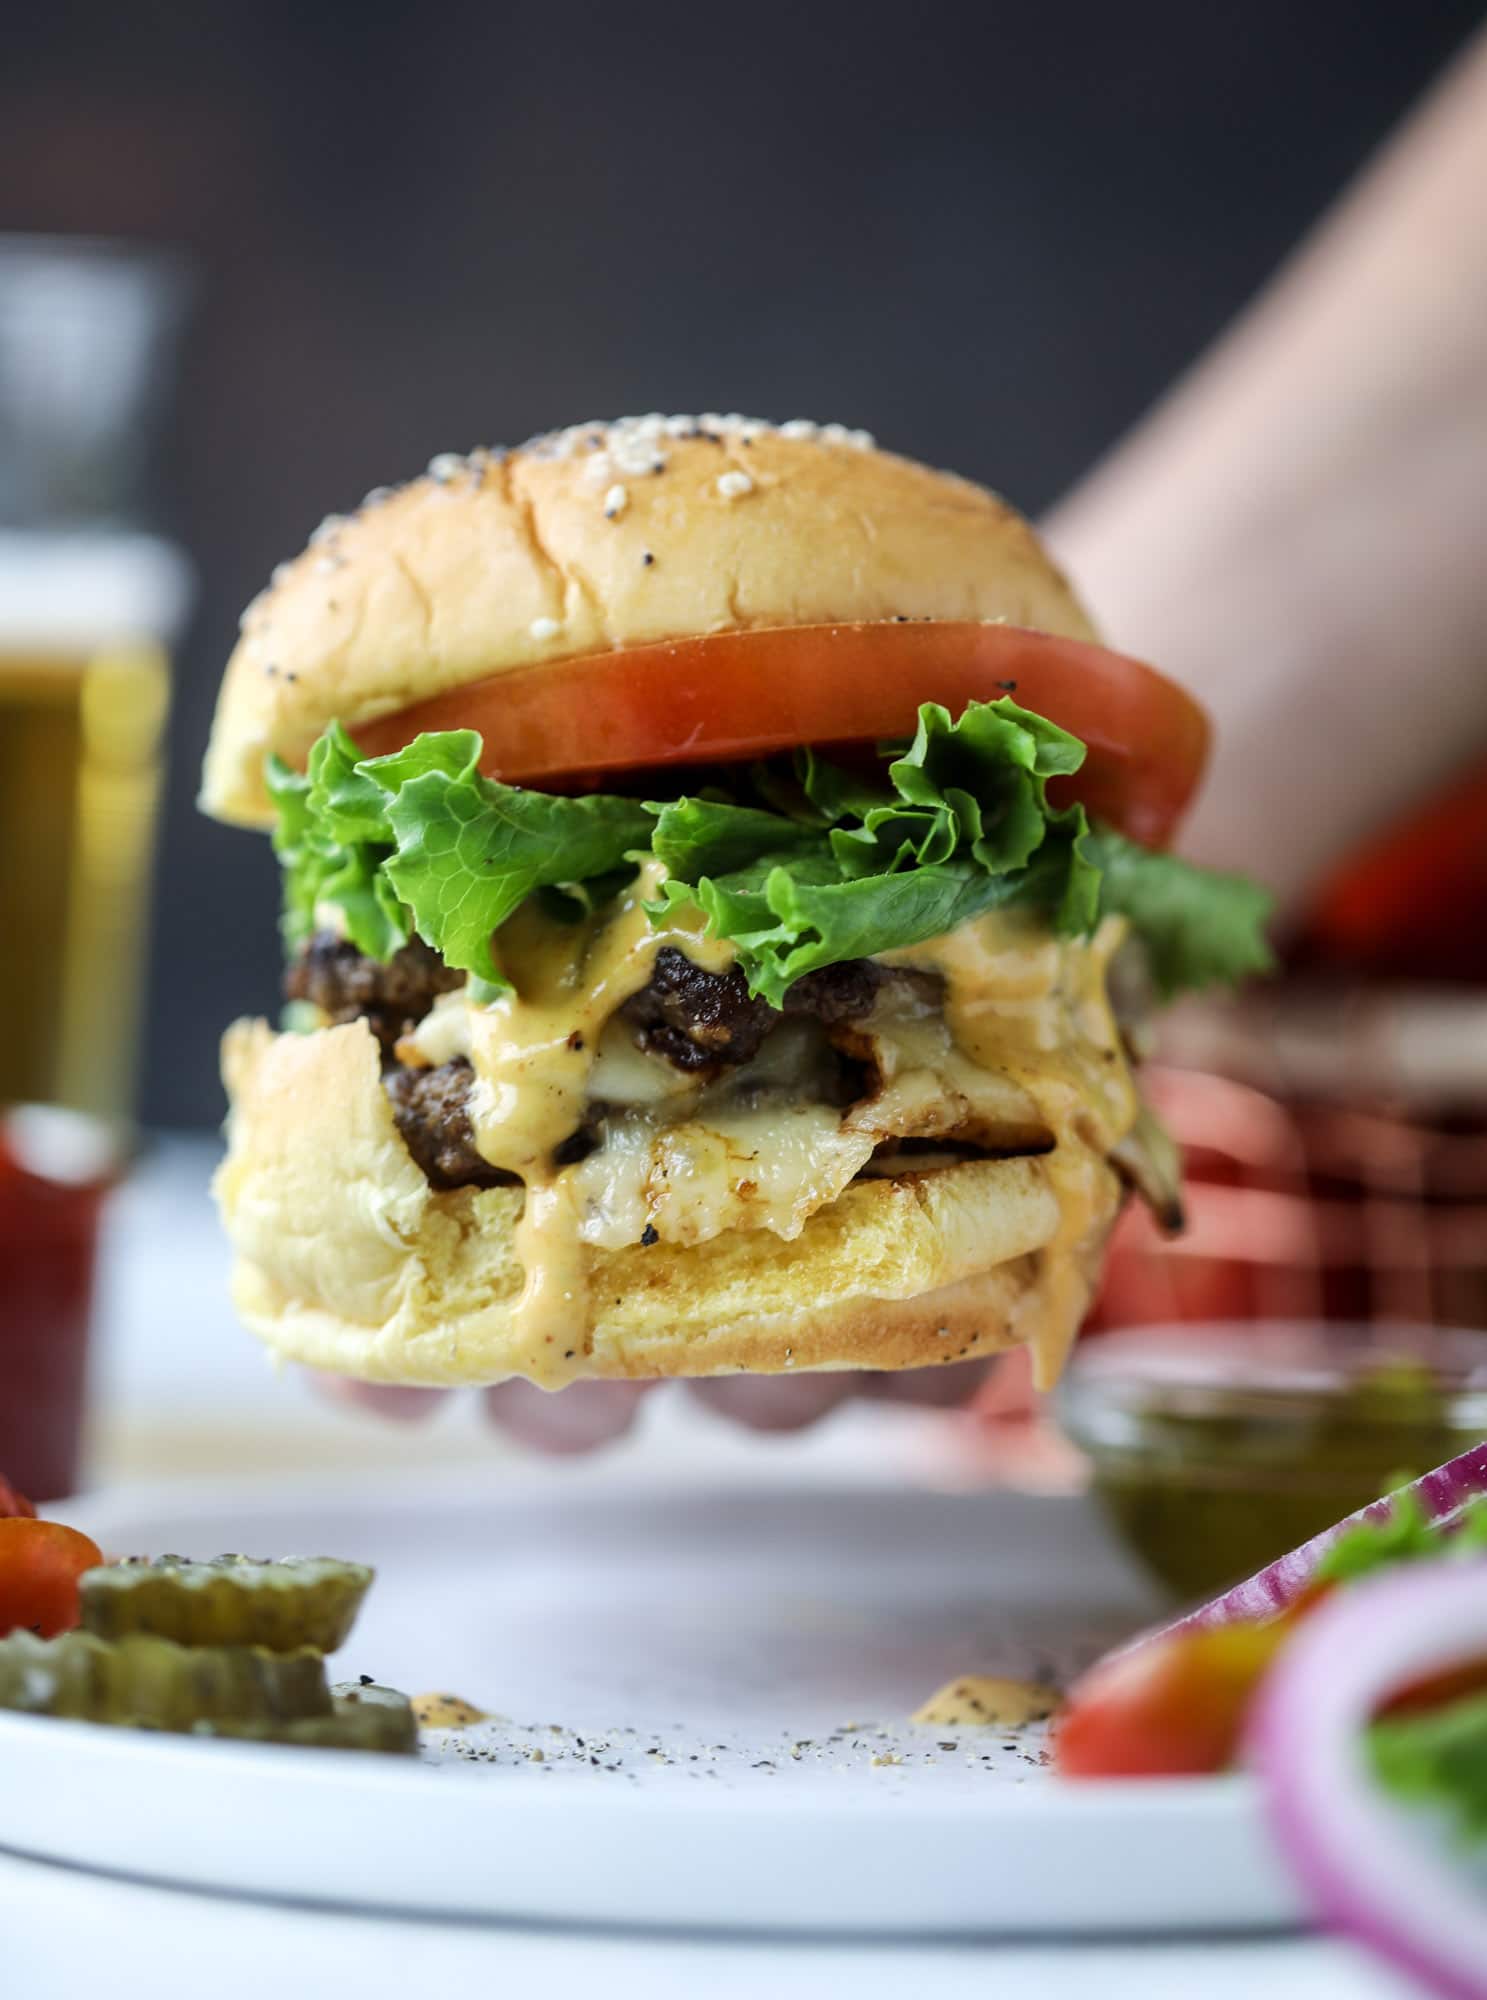 These smash burgers are to die for! All you need are a few ingredients and 30 minutes to make these smash burgers happen. Topped with melty smoked gouda and topped with a creamy, tangy house sauce, these are the best burgers ever! I howsweeteats.com #smash #burgers #smoked #gouda #special #sauce